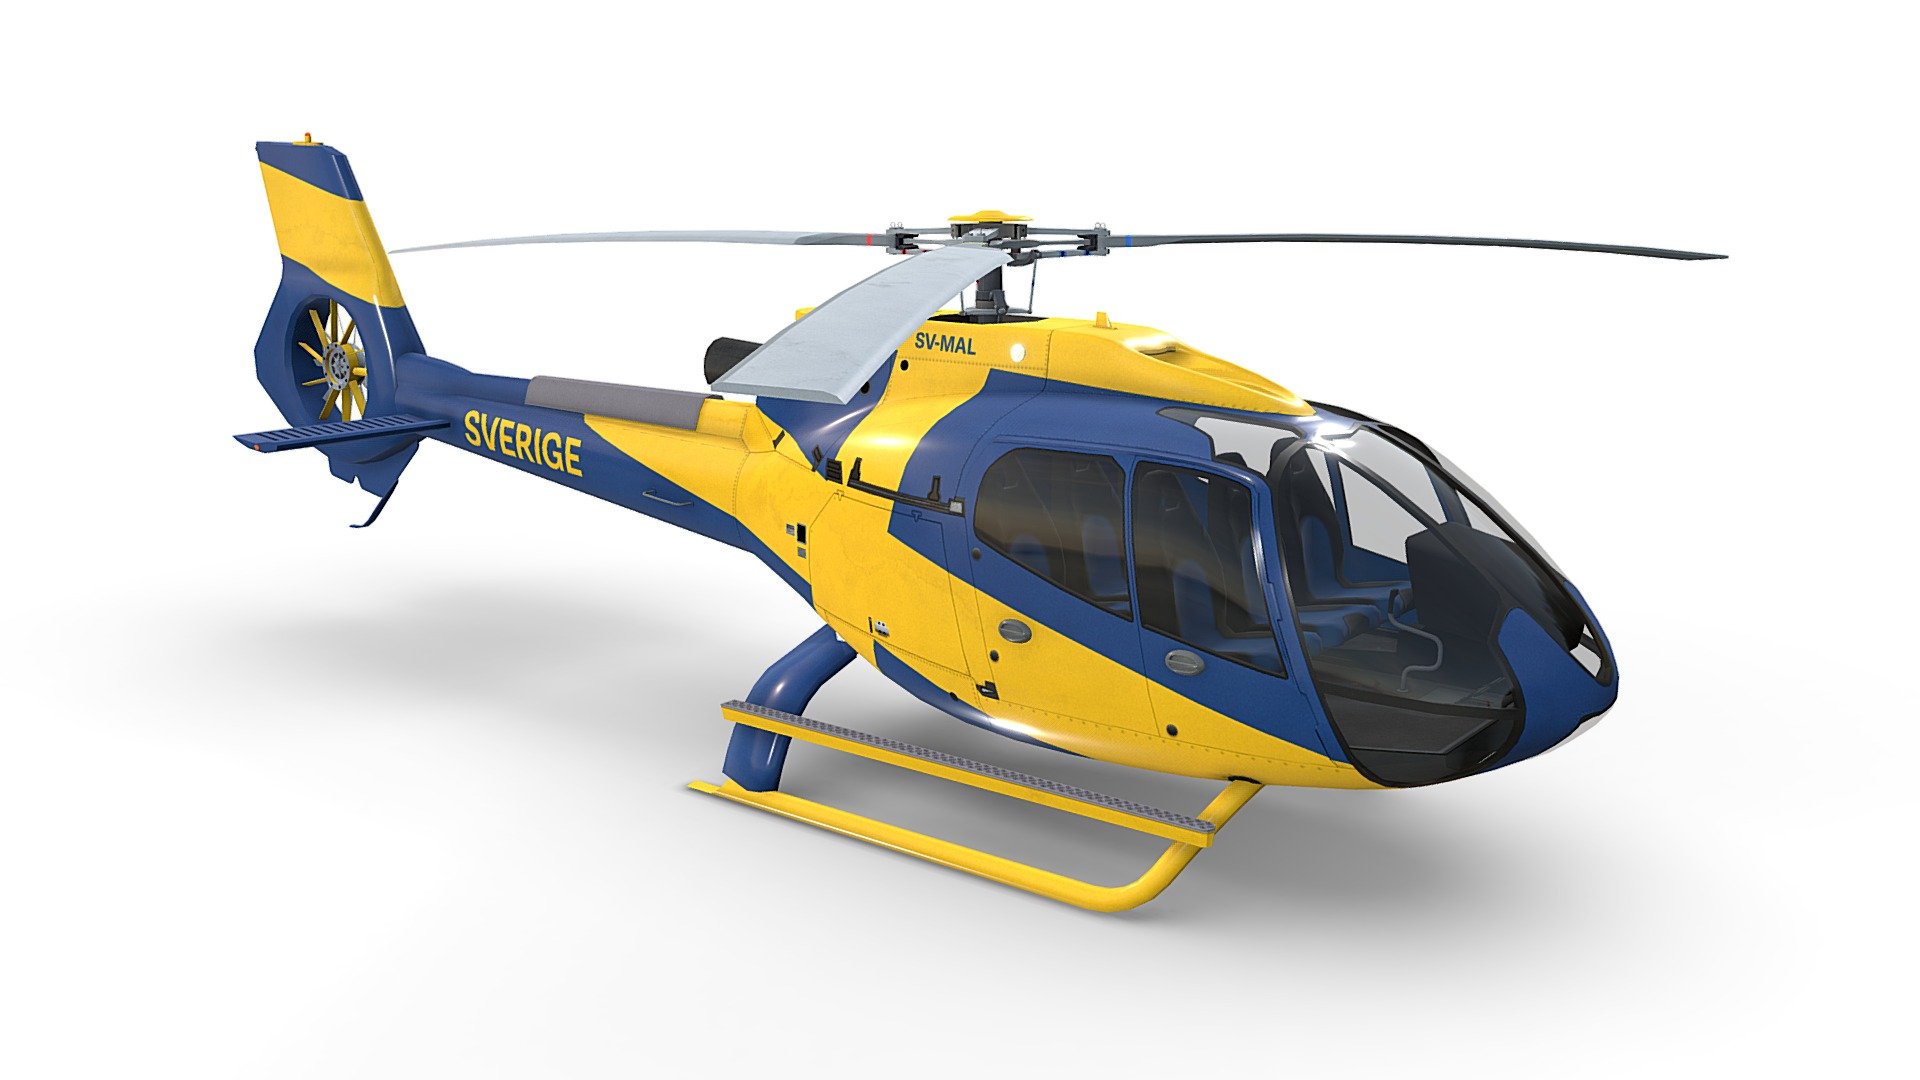 Sverige (Sweden) Helicopter Airbus H130 Livery 30. Game ready, realtime optimized Airbus Helicopter H130 with high visual accuracy. Both PBR workflows ready native 4096 x 4096 px textures. Clean lowpoly mesh with 4 preconfigured level of details LOD0 19710 tris, LOD1 10462 tris, LOD2 7388 tris, LOD3 5990 tris. Properly placed rotors pivots for flawless rotations. Simple capsule built interior that fits perfectly the body. 100% human controlled triangulation. All parts 100% unwrapped non-overlapping. Made using blueprints in real world scale meters. Included are flawless files .max (native 3dsmax 2014), .fbx, and .obj. All LOD are exported seperately and together in each file format 3d model